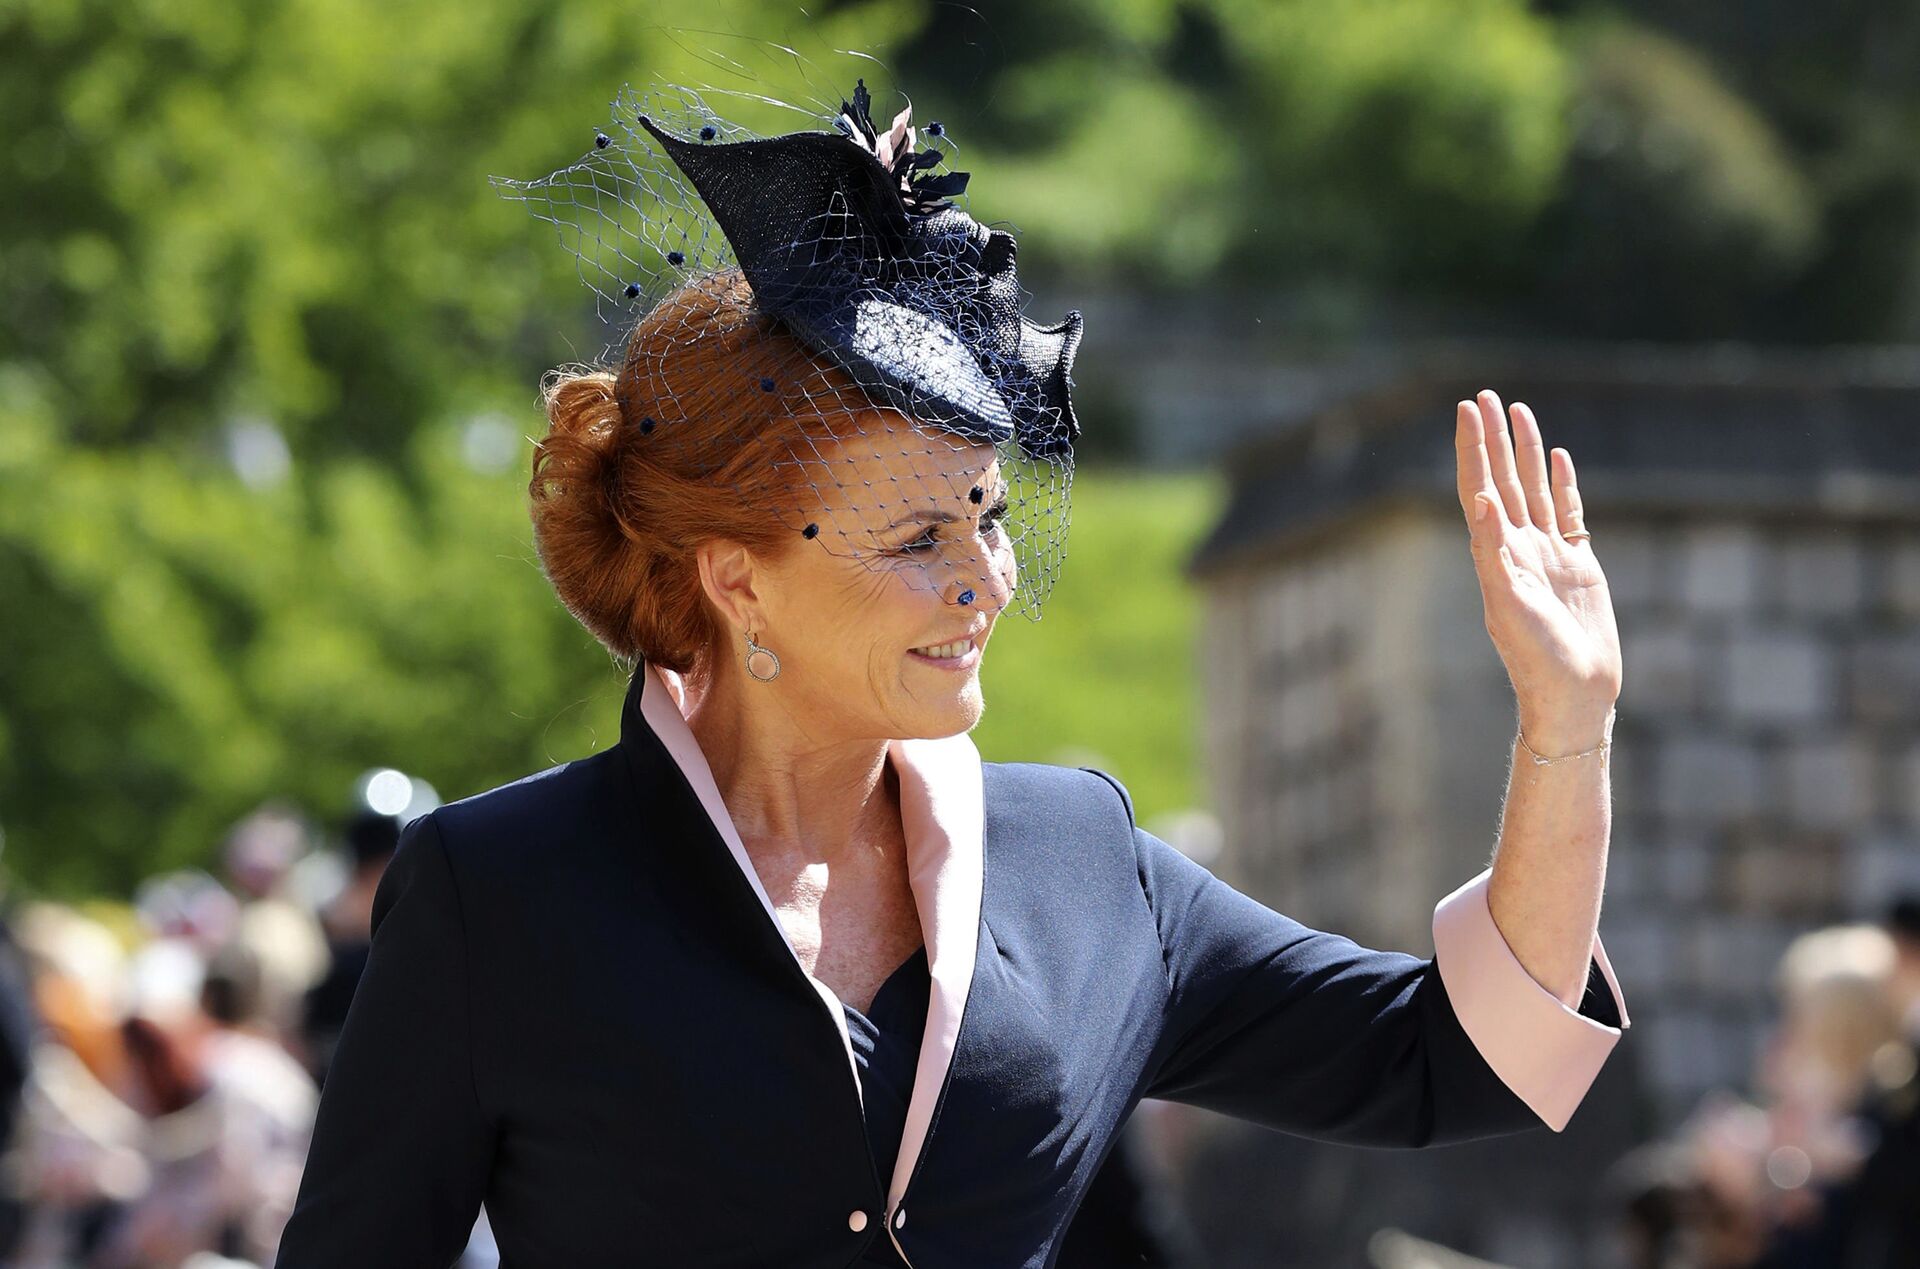 Sarah Ferguson arrives for the wedding ceremony of Prince Harry and Meghan Markle at St. George's Chapel in Windsor Castle in Windsor, near London, England, Saturday, May 19, 2018 - Sputnik International, 1920, 17.11.2021